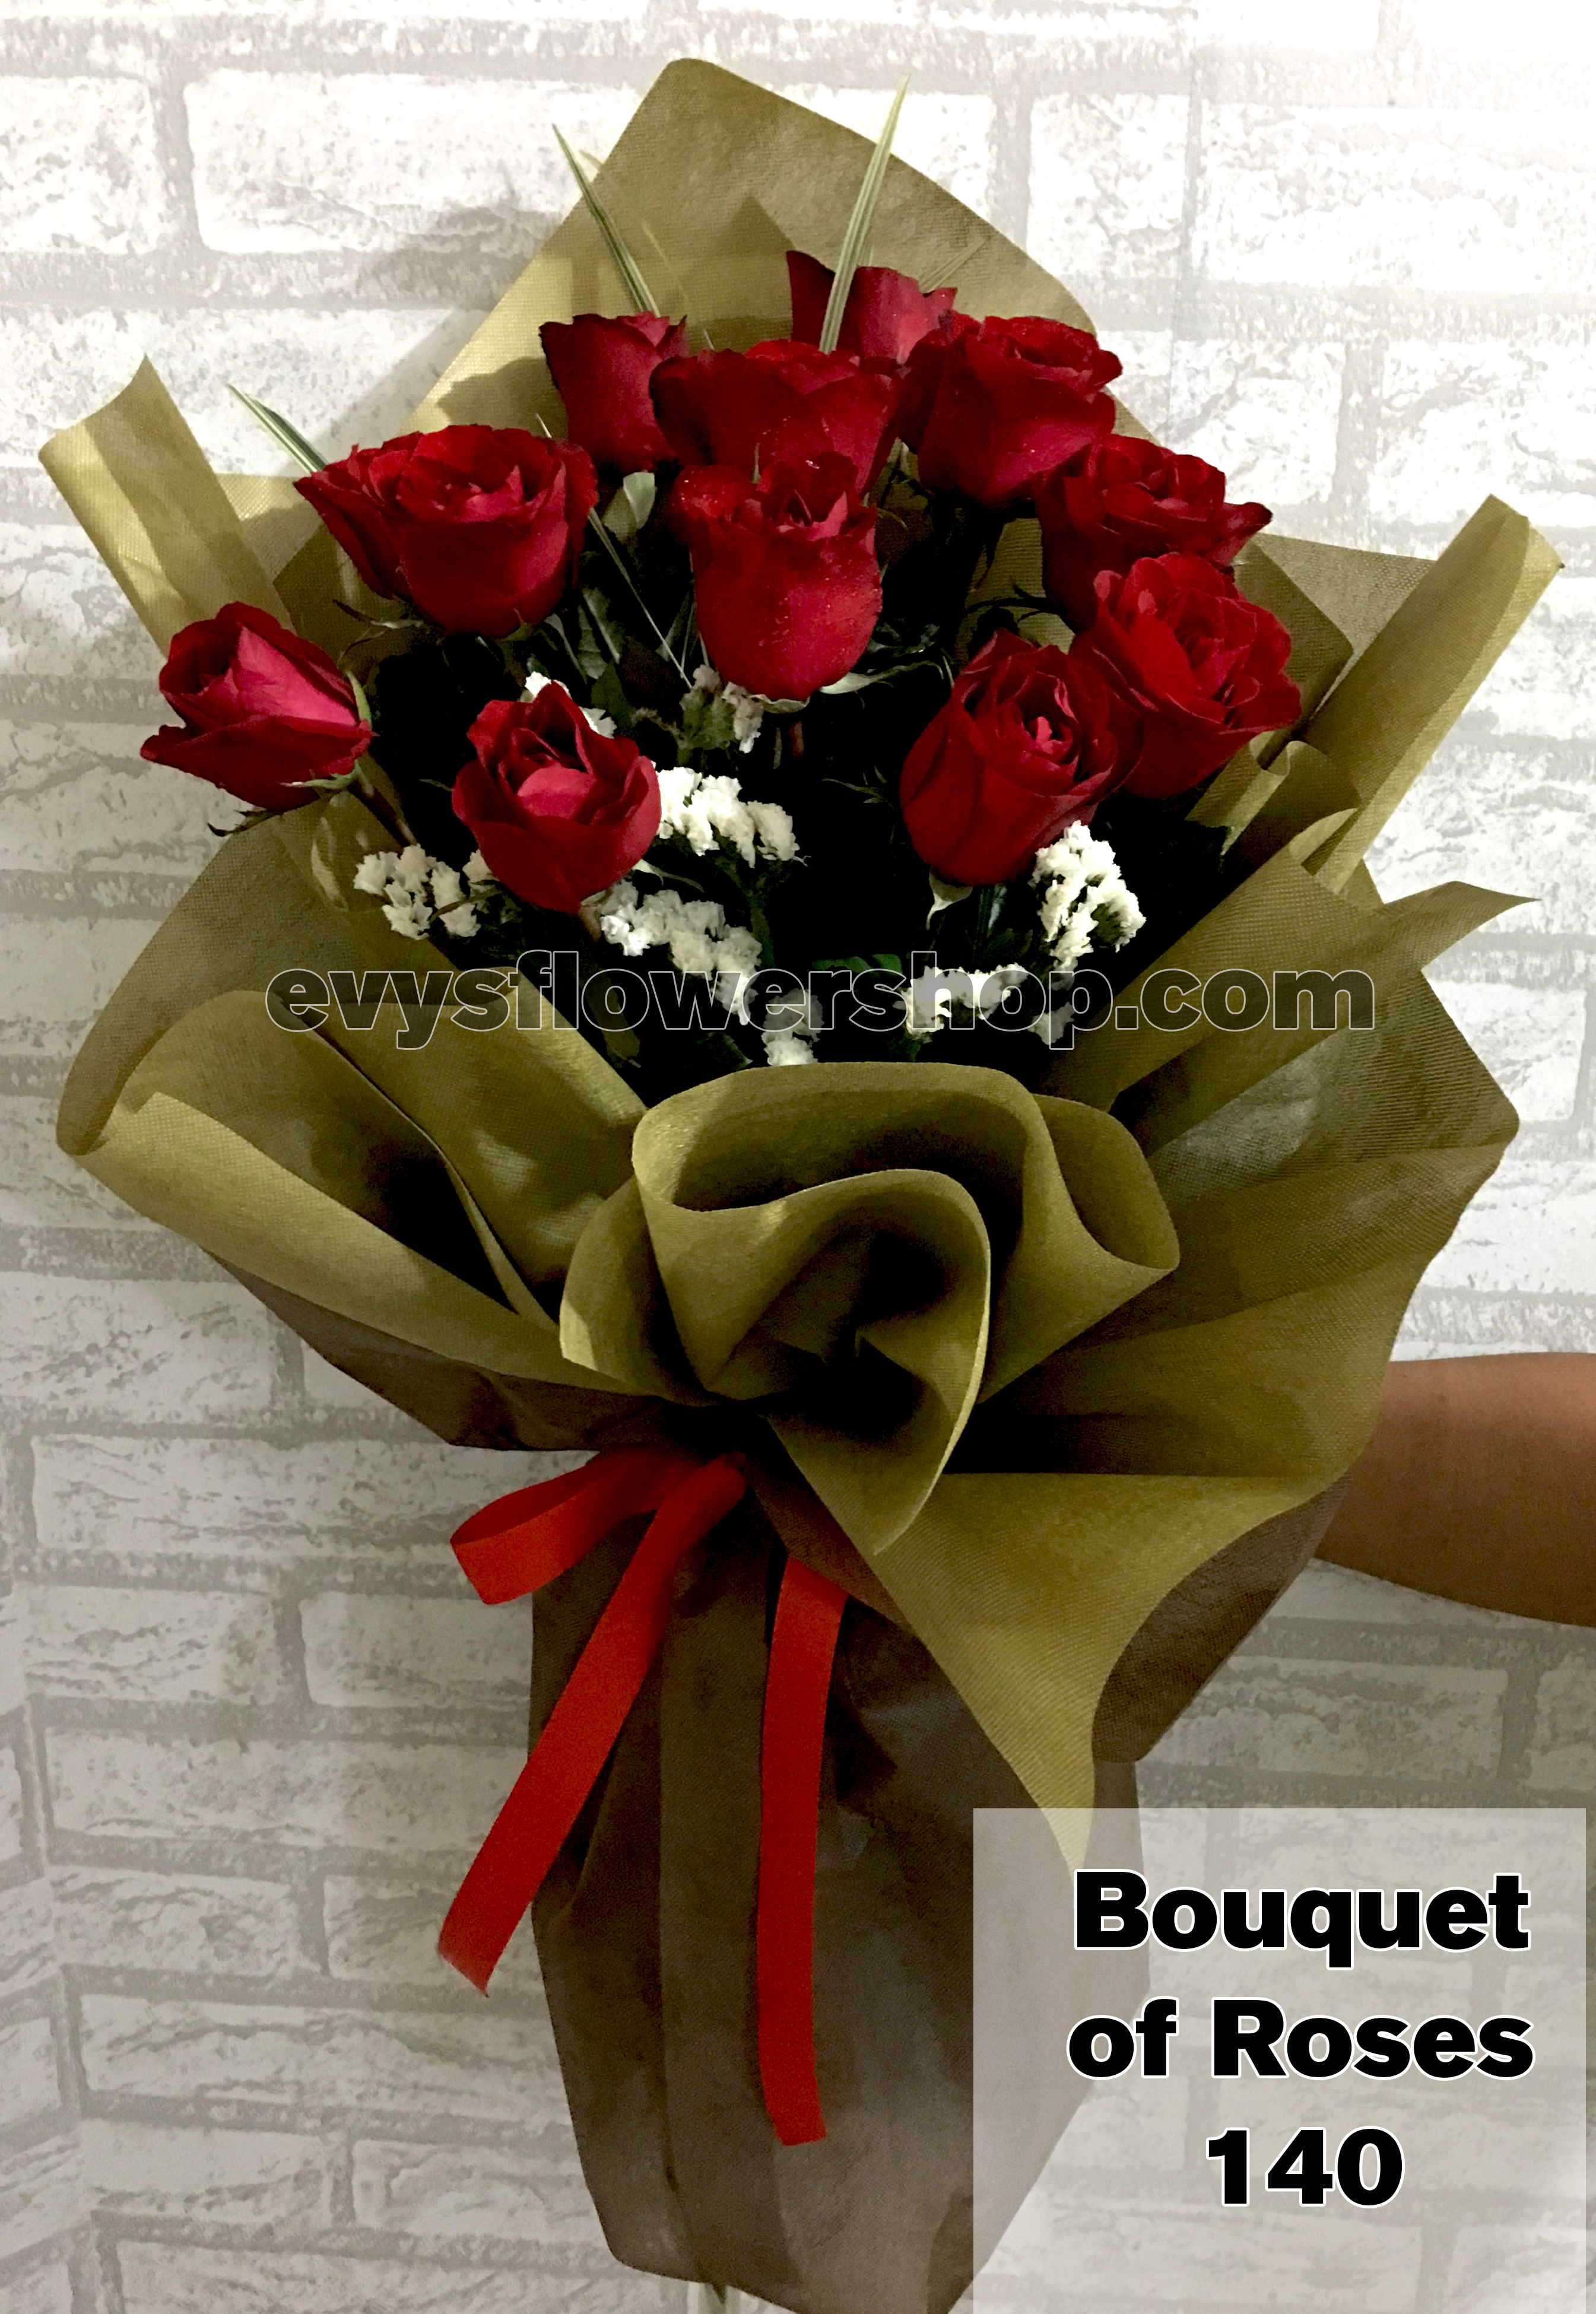 bouquet of roses 140 - EVYS FLOWER SHOP FREE DELIVERY